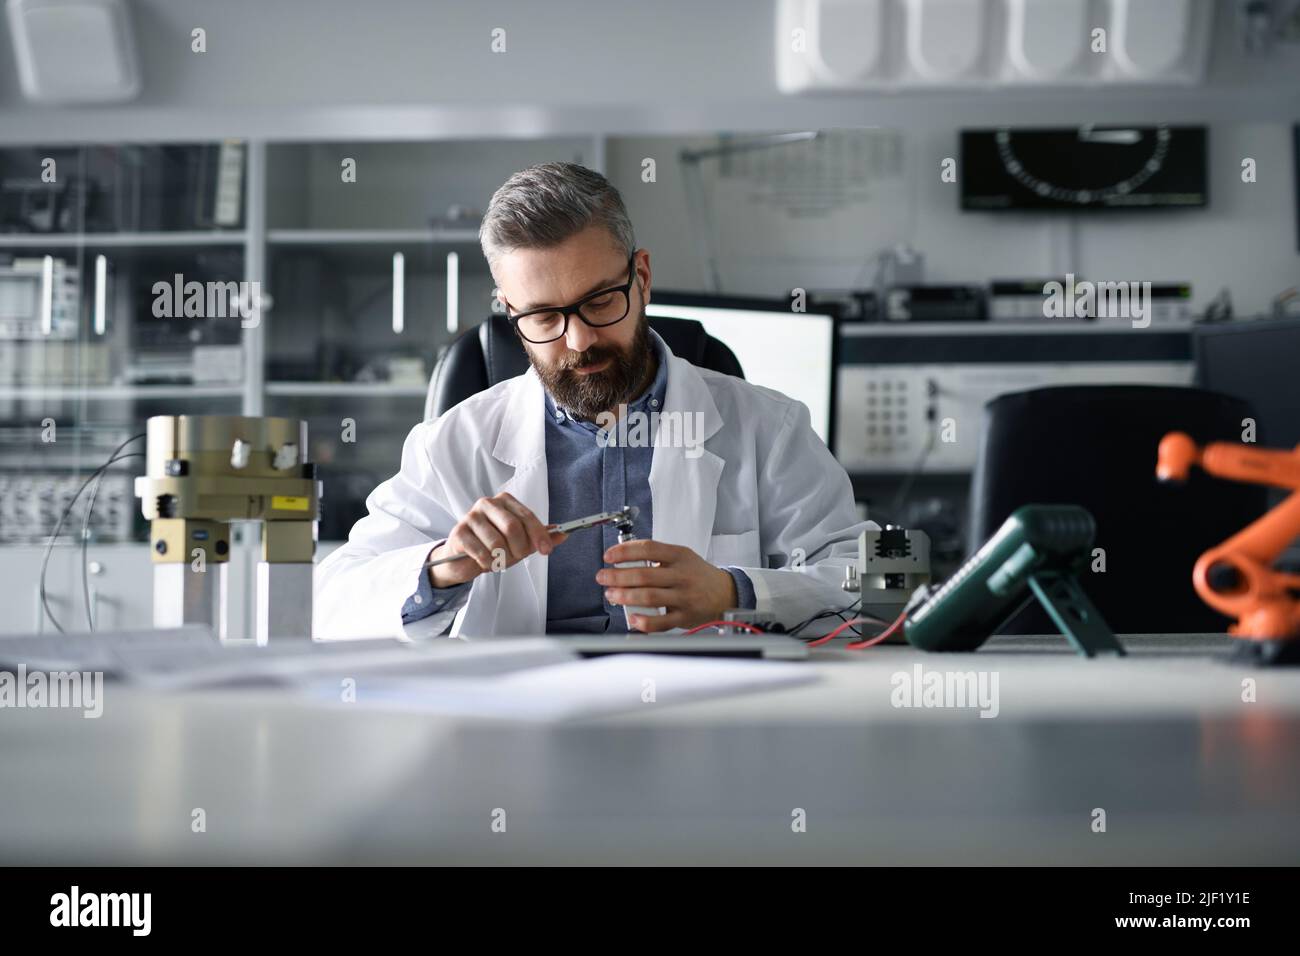 A robotics engineer working on desing of modern robotic arm adn sitting at dest in laboratory. Stock Photo